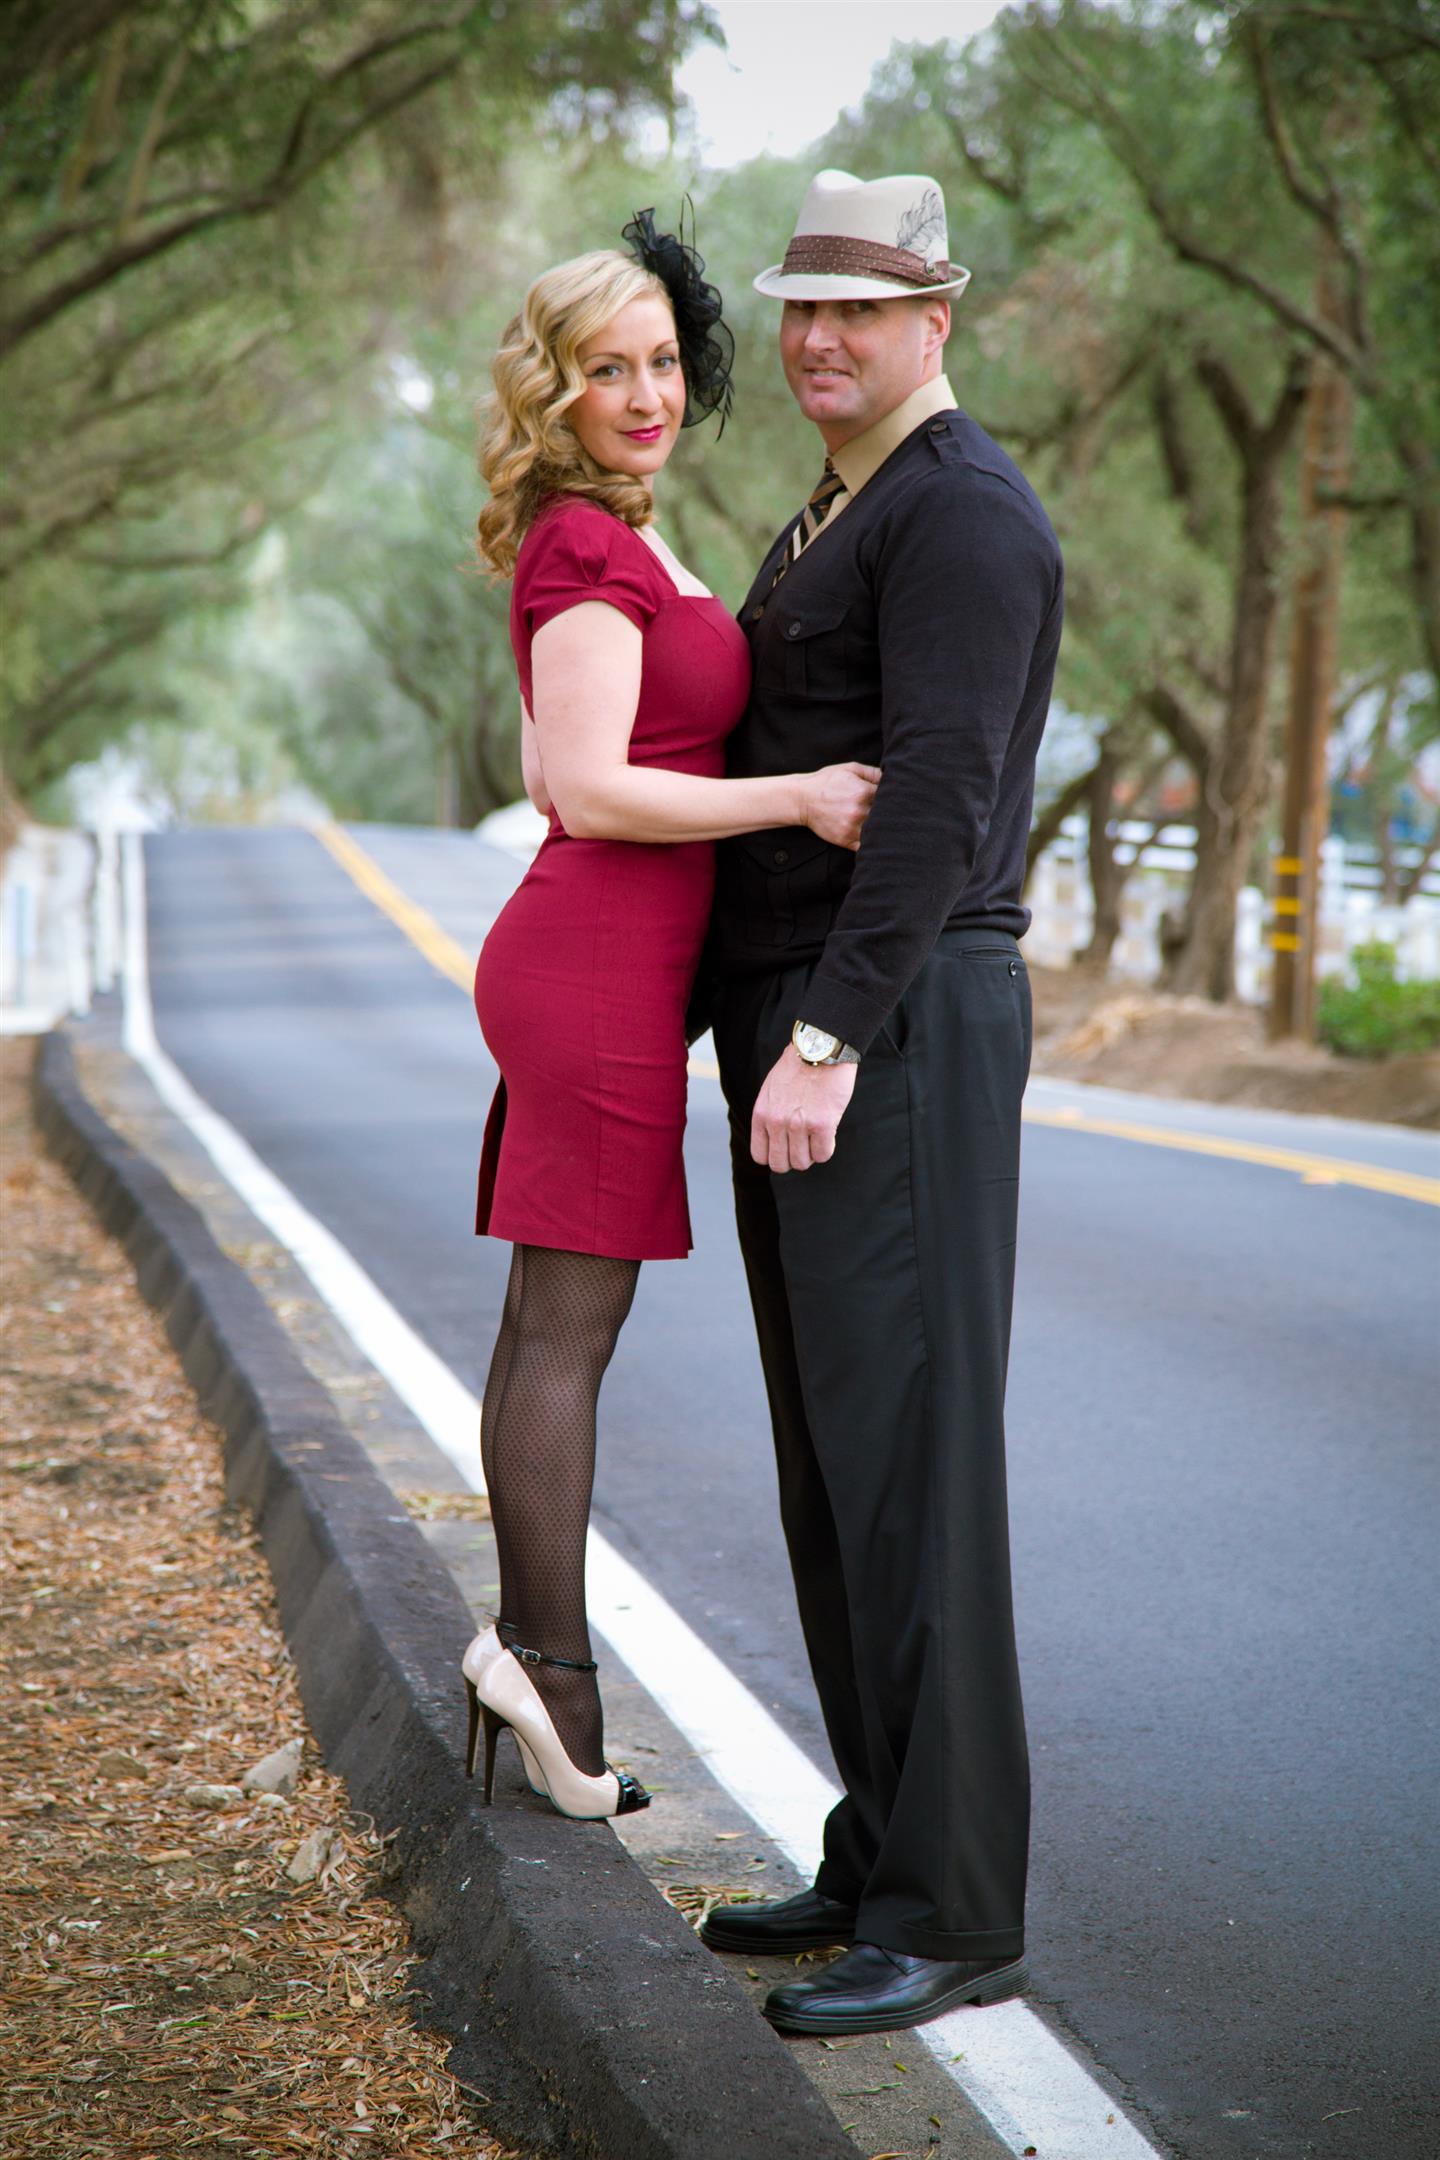 A Stylish Vintage Engagement Session With a Classic Cadillac